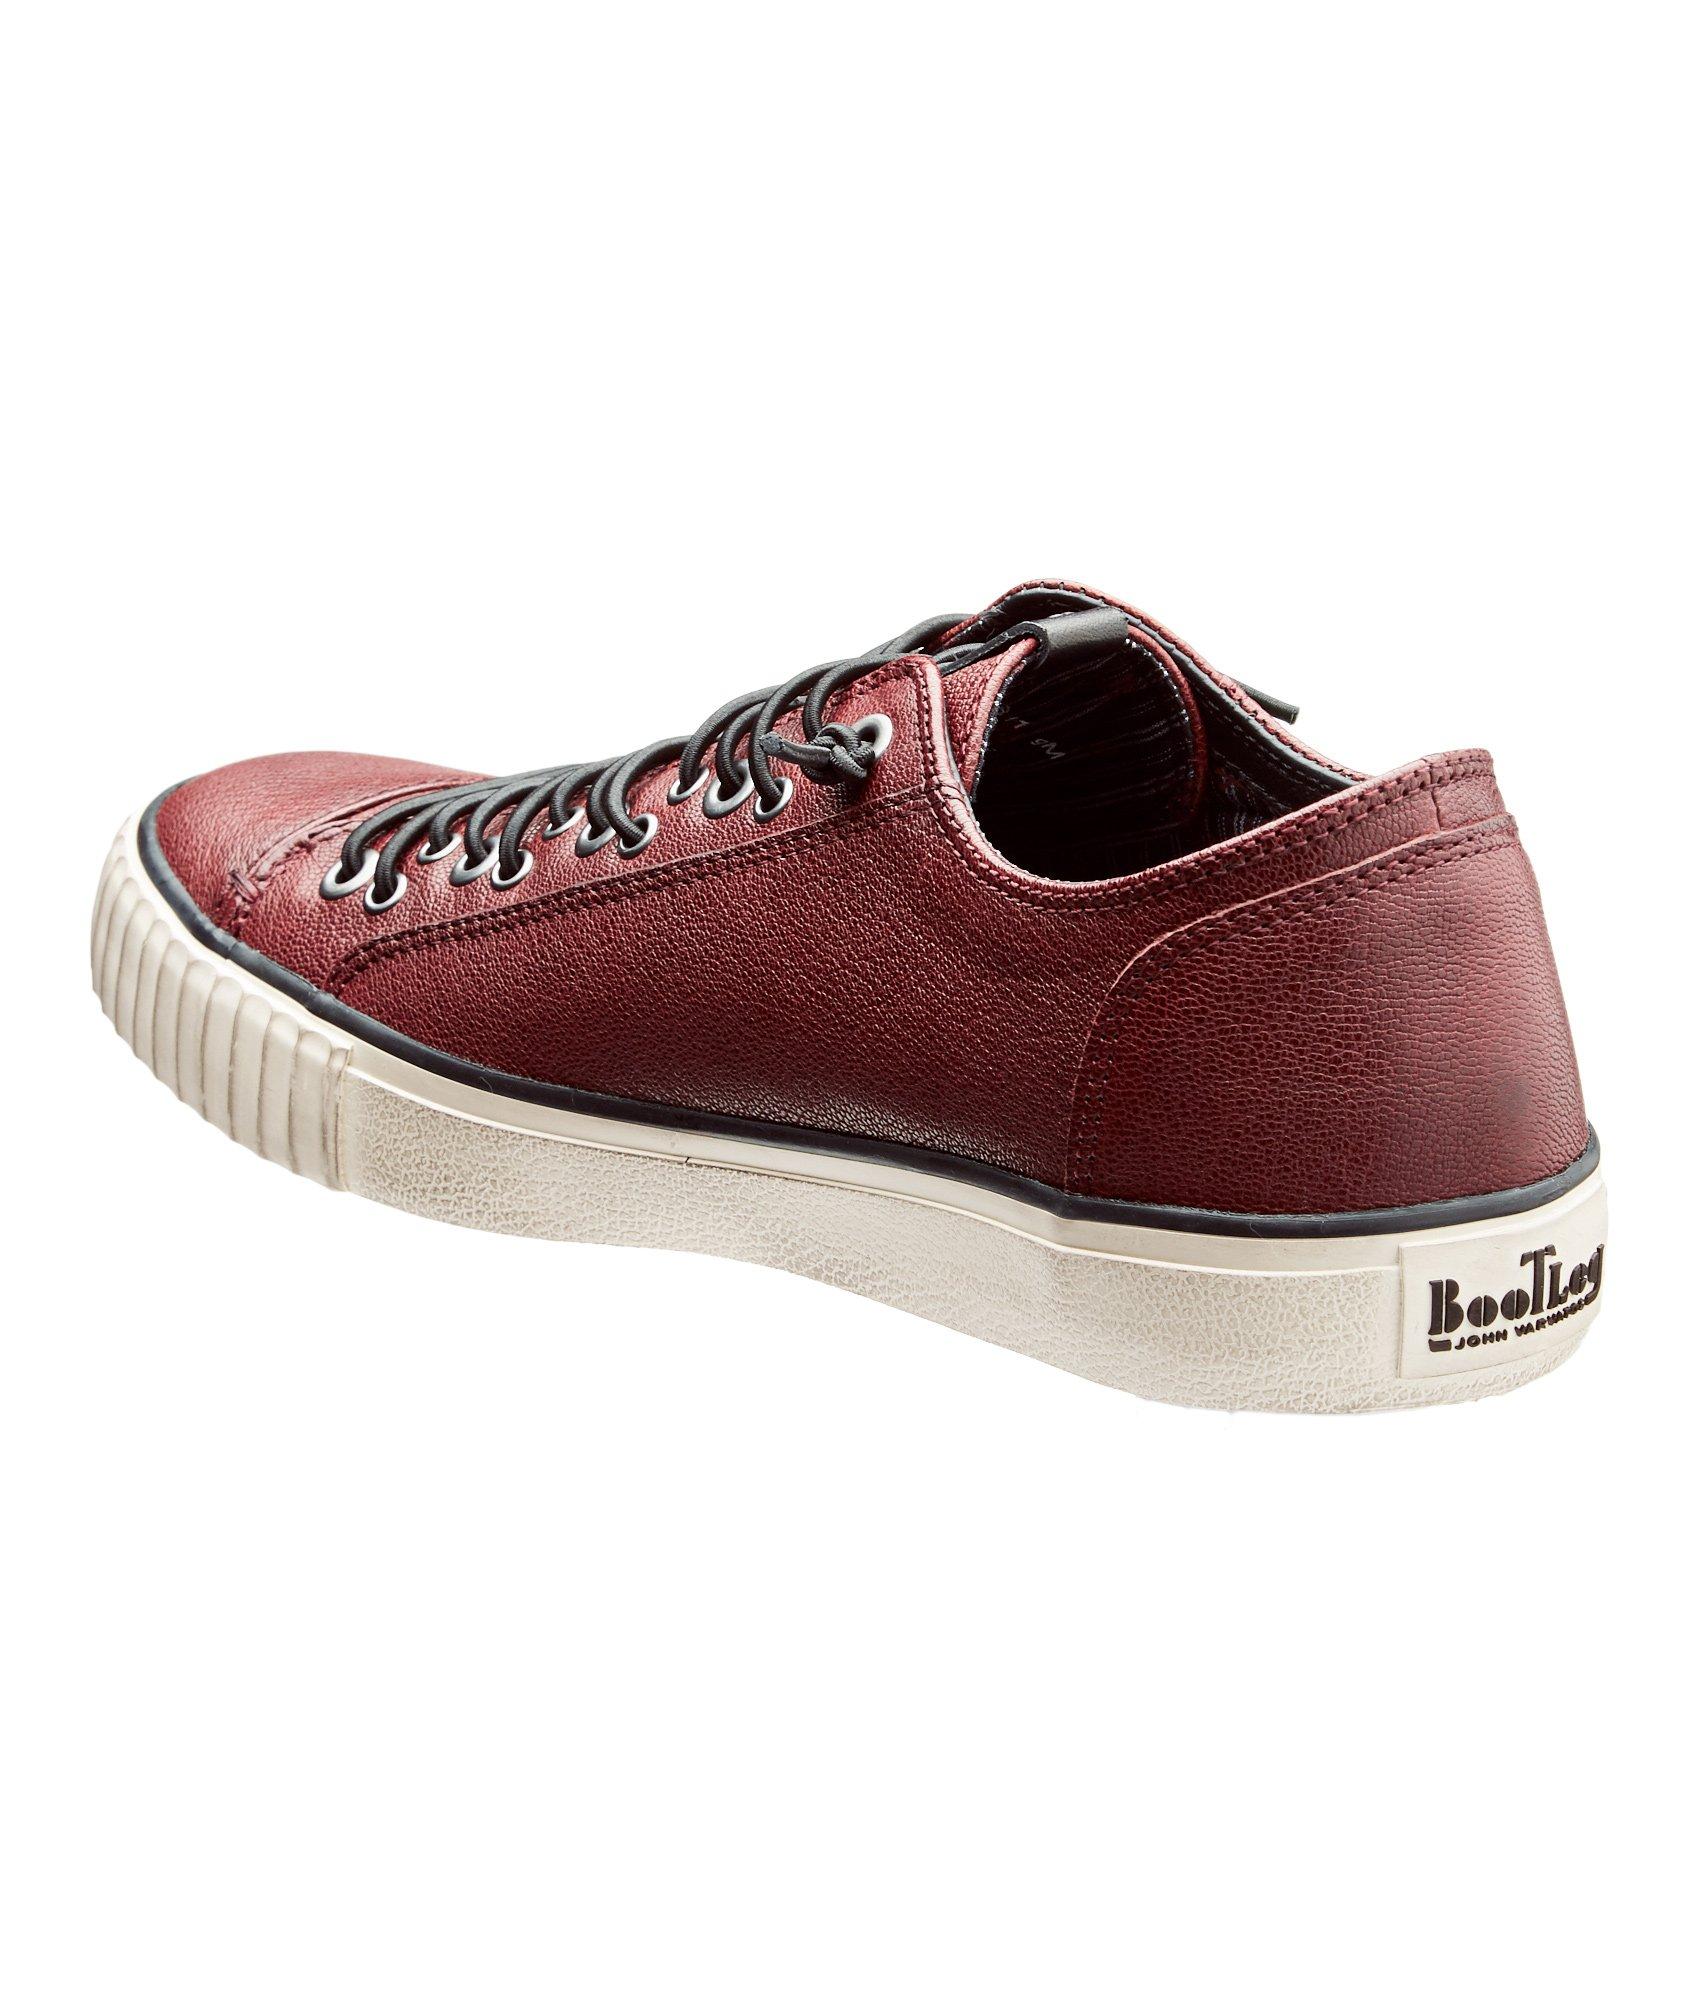 BooTLeg Leather Low-Top Sneakers image 1